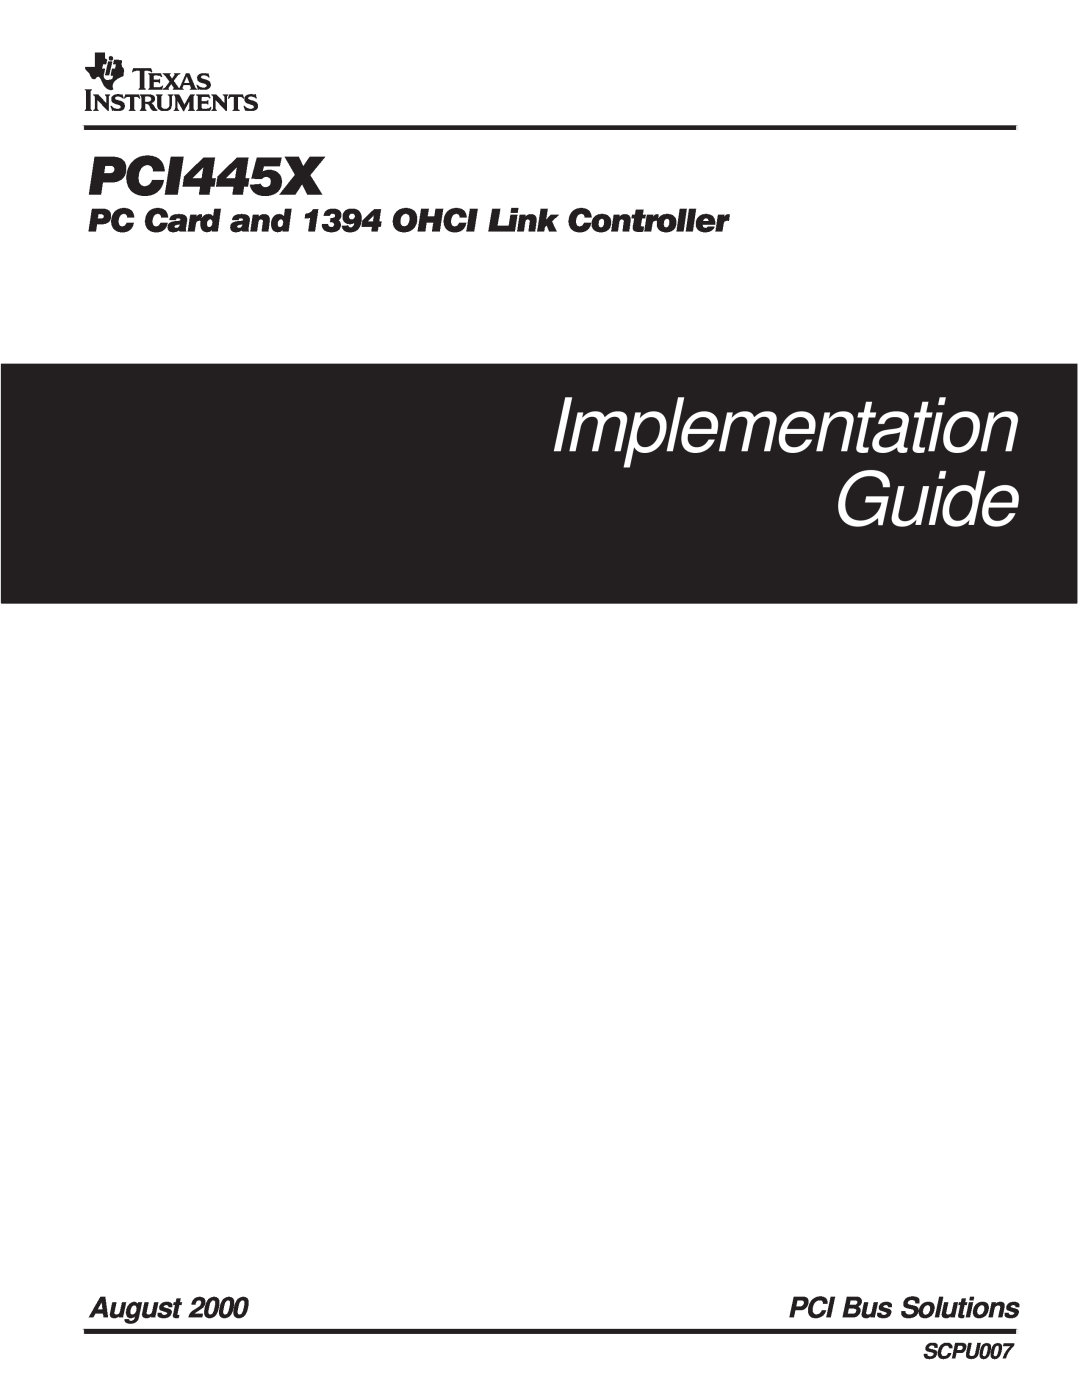 Texas Instruments PCI445X manual Implementation Guide, August, PCI Bus Solutions, SCPU007 